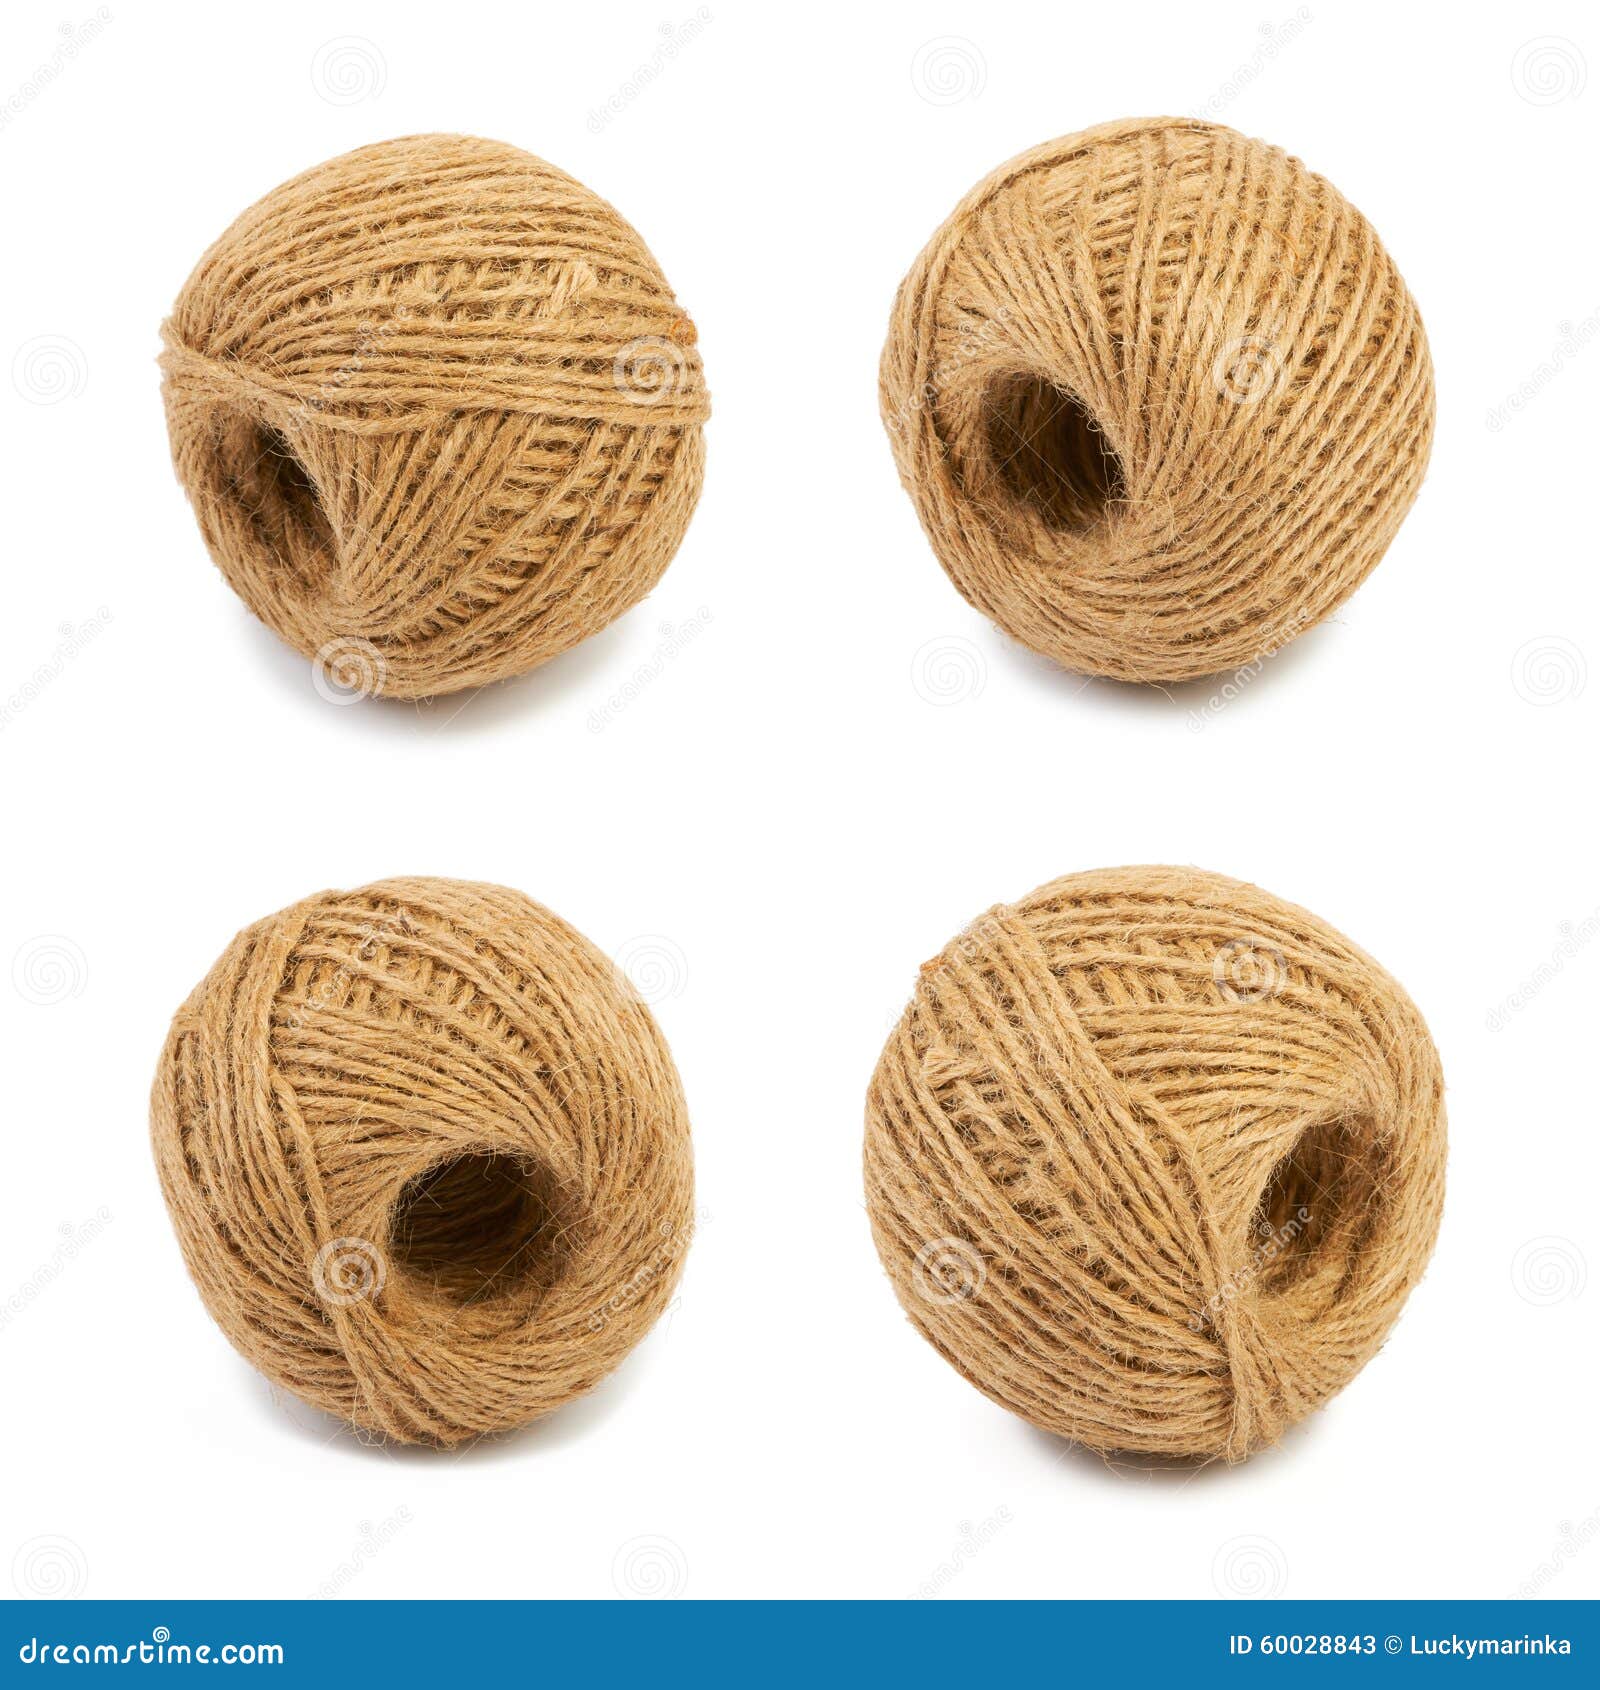 Thin natural rope stock image. Image of frazzled, hemp - 60028843